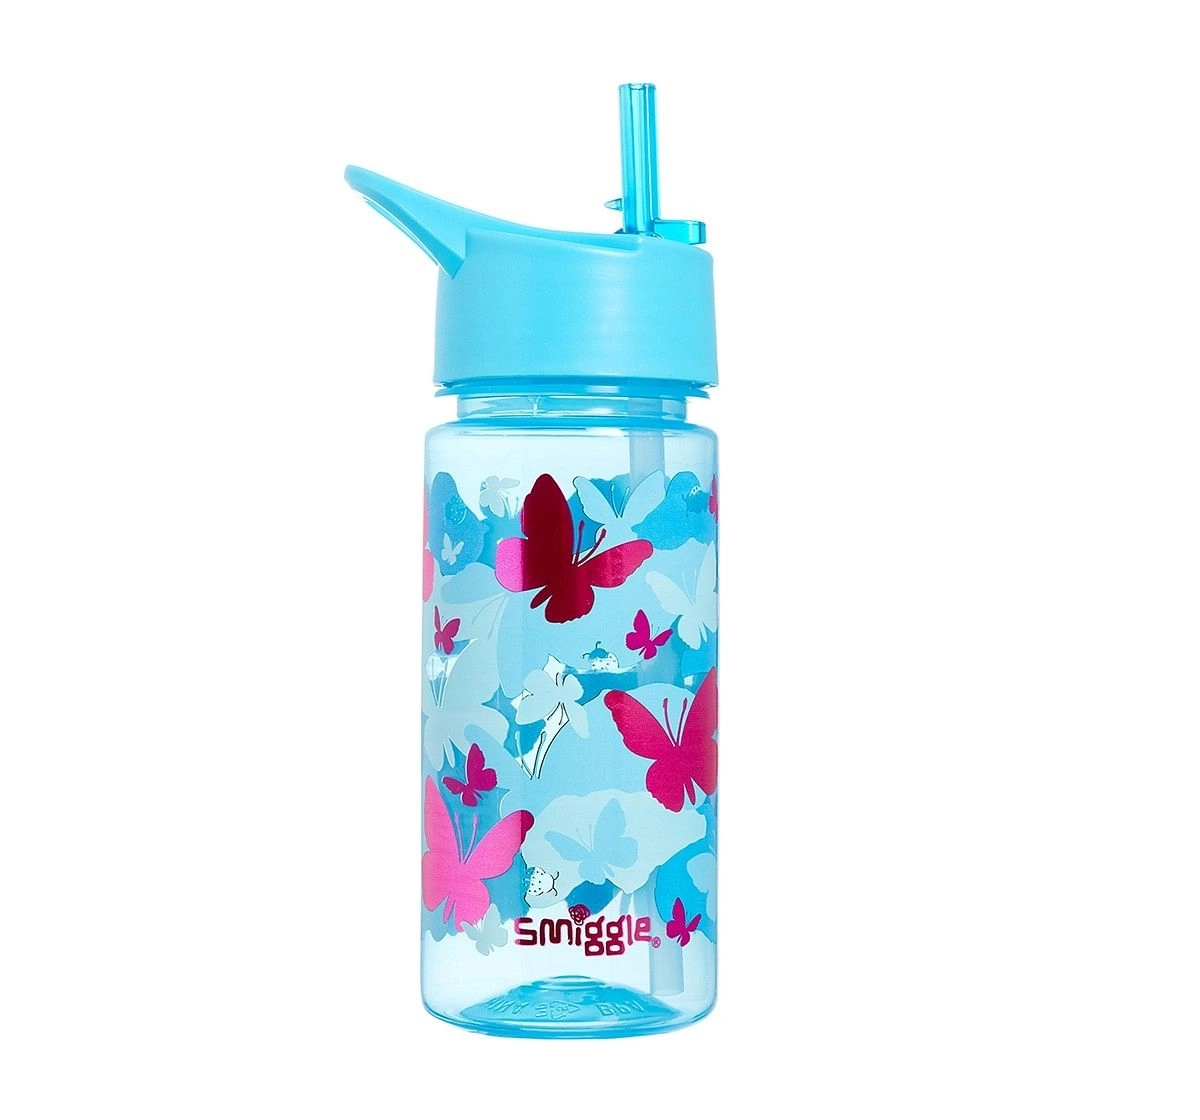 Smiggle Giggle Bottle with Flip Top Spout - Butterfly Print Bags for Kids age 3Y+ (Blue)